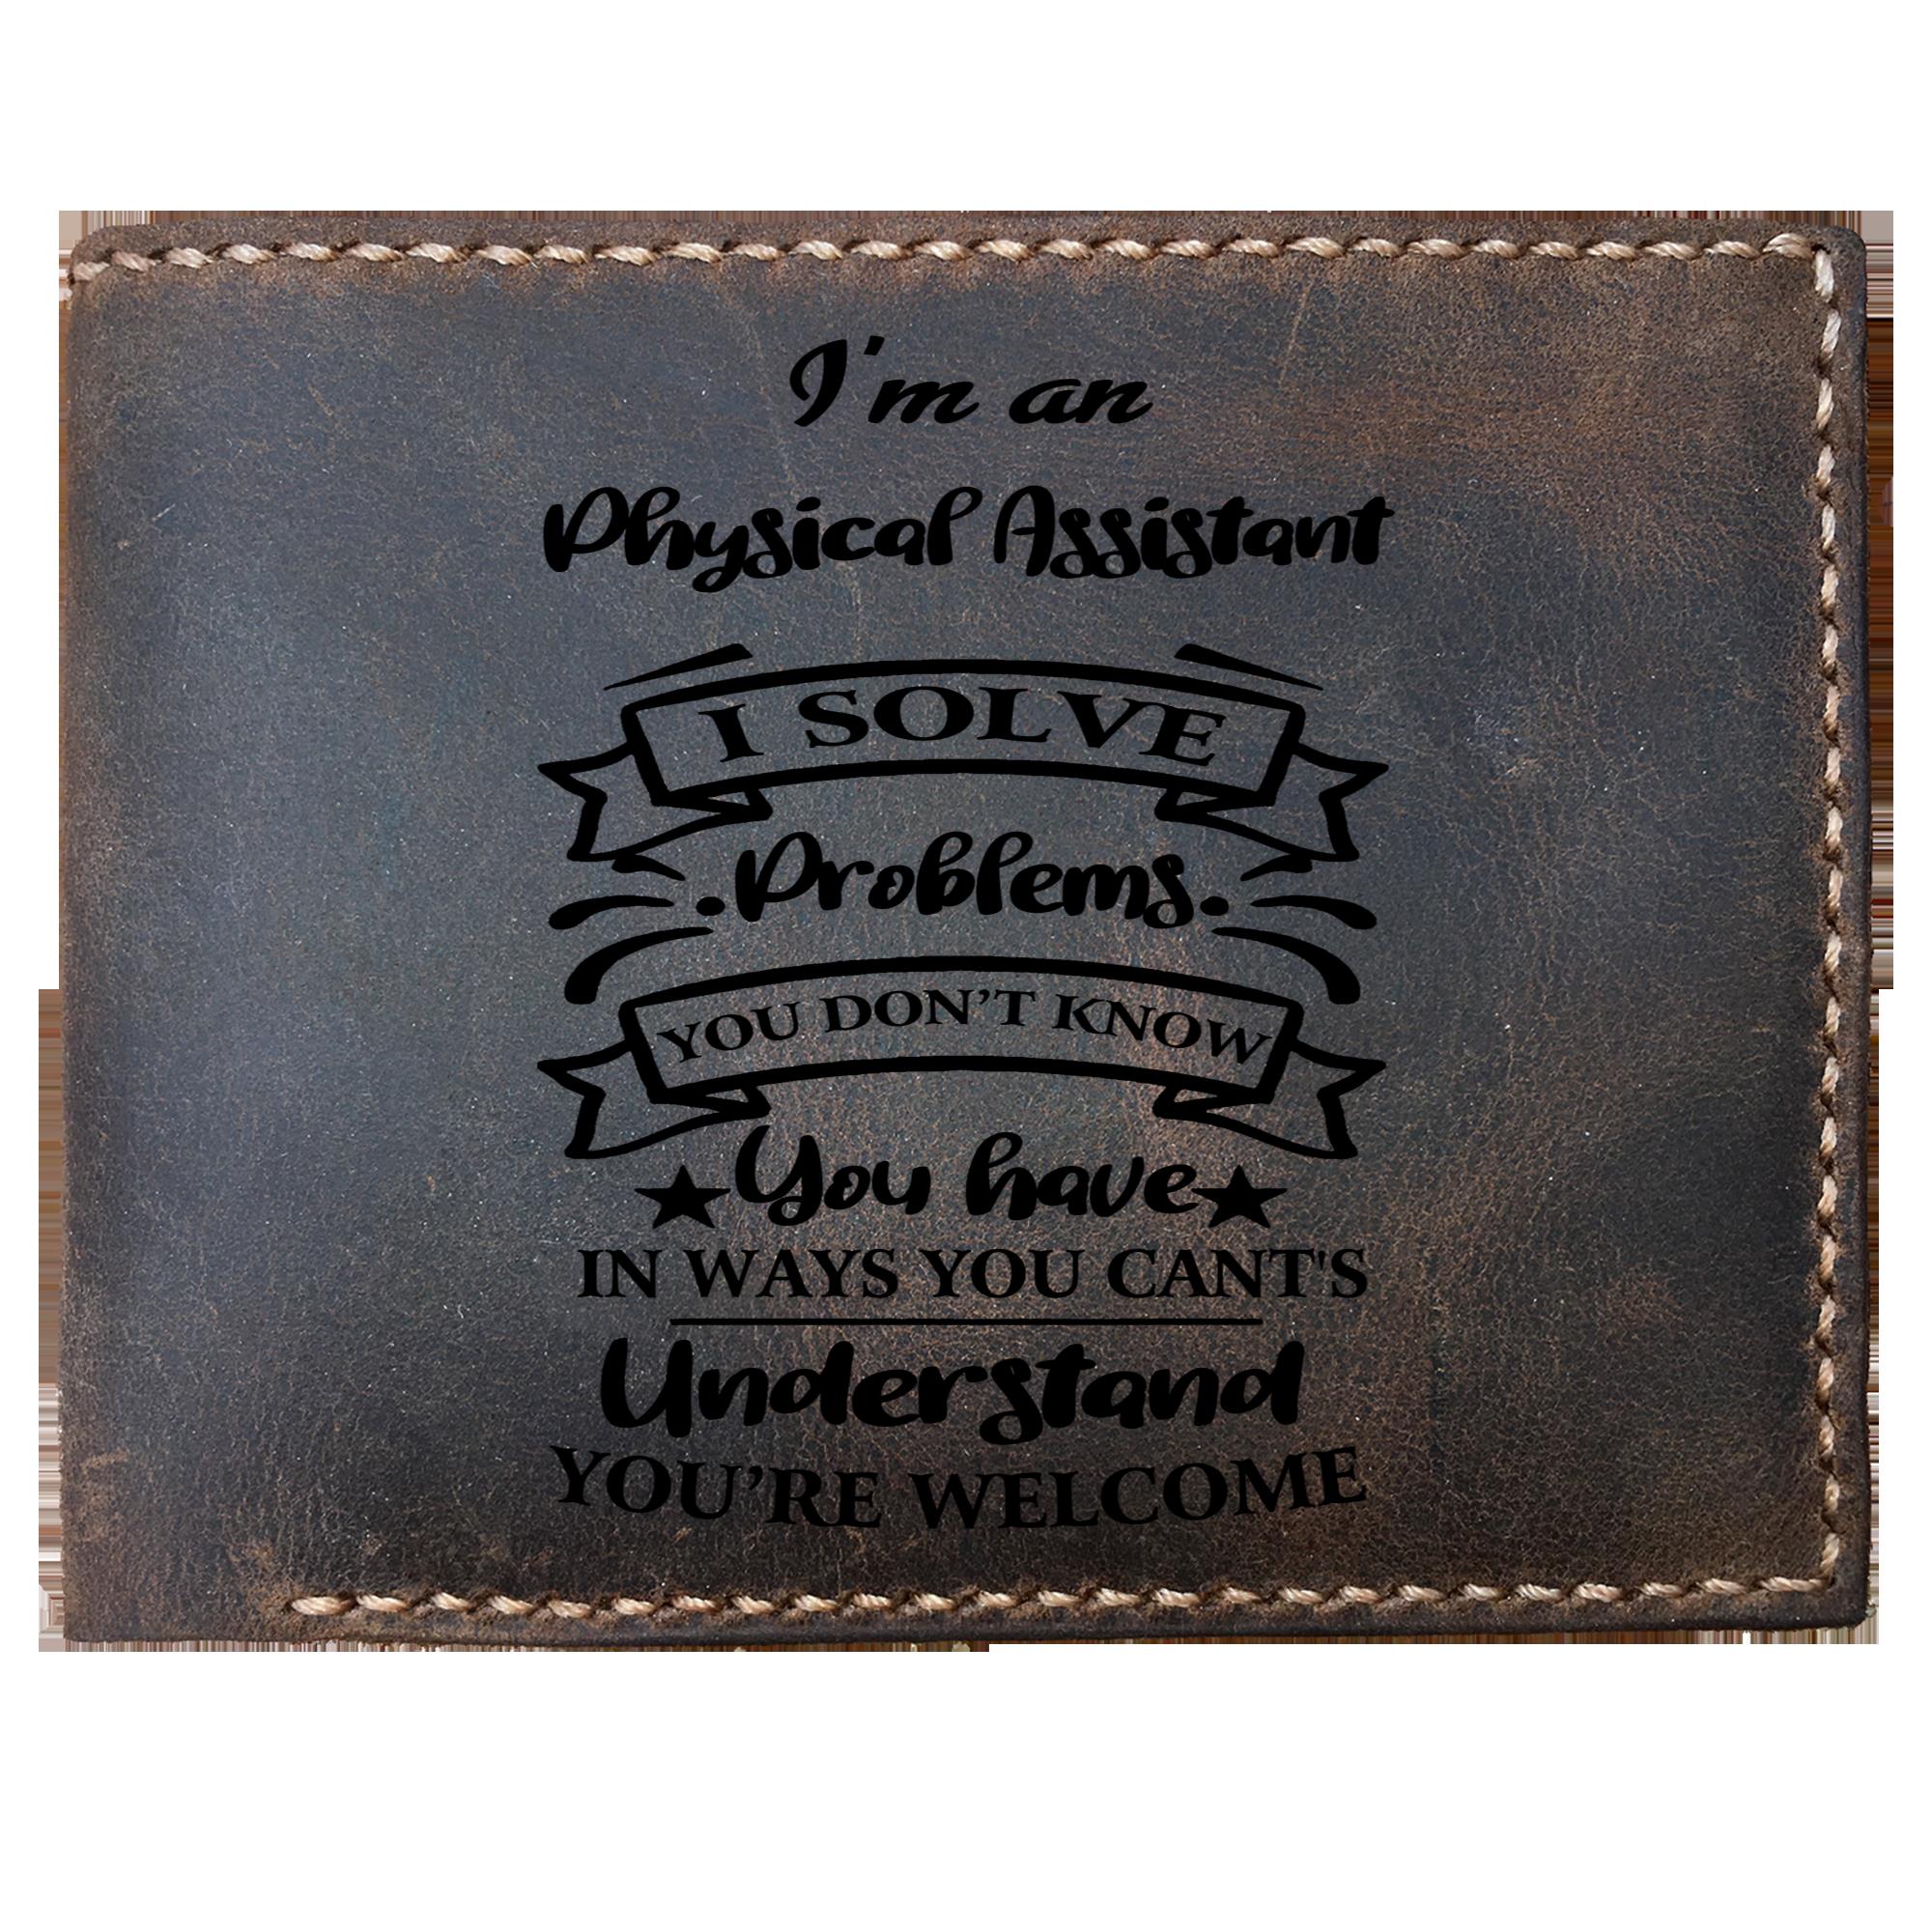 Skitongifts Funny Custom Laser Engraved Bifold Leather Wallet For Men, I'm an Physical Assistant Solve Problems, Father's Day Gifts